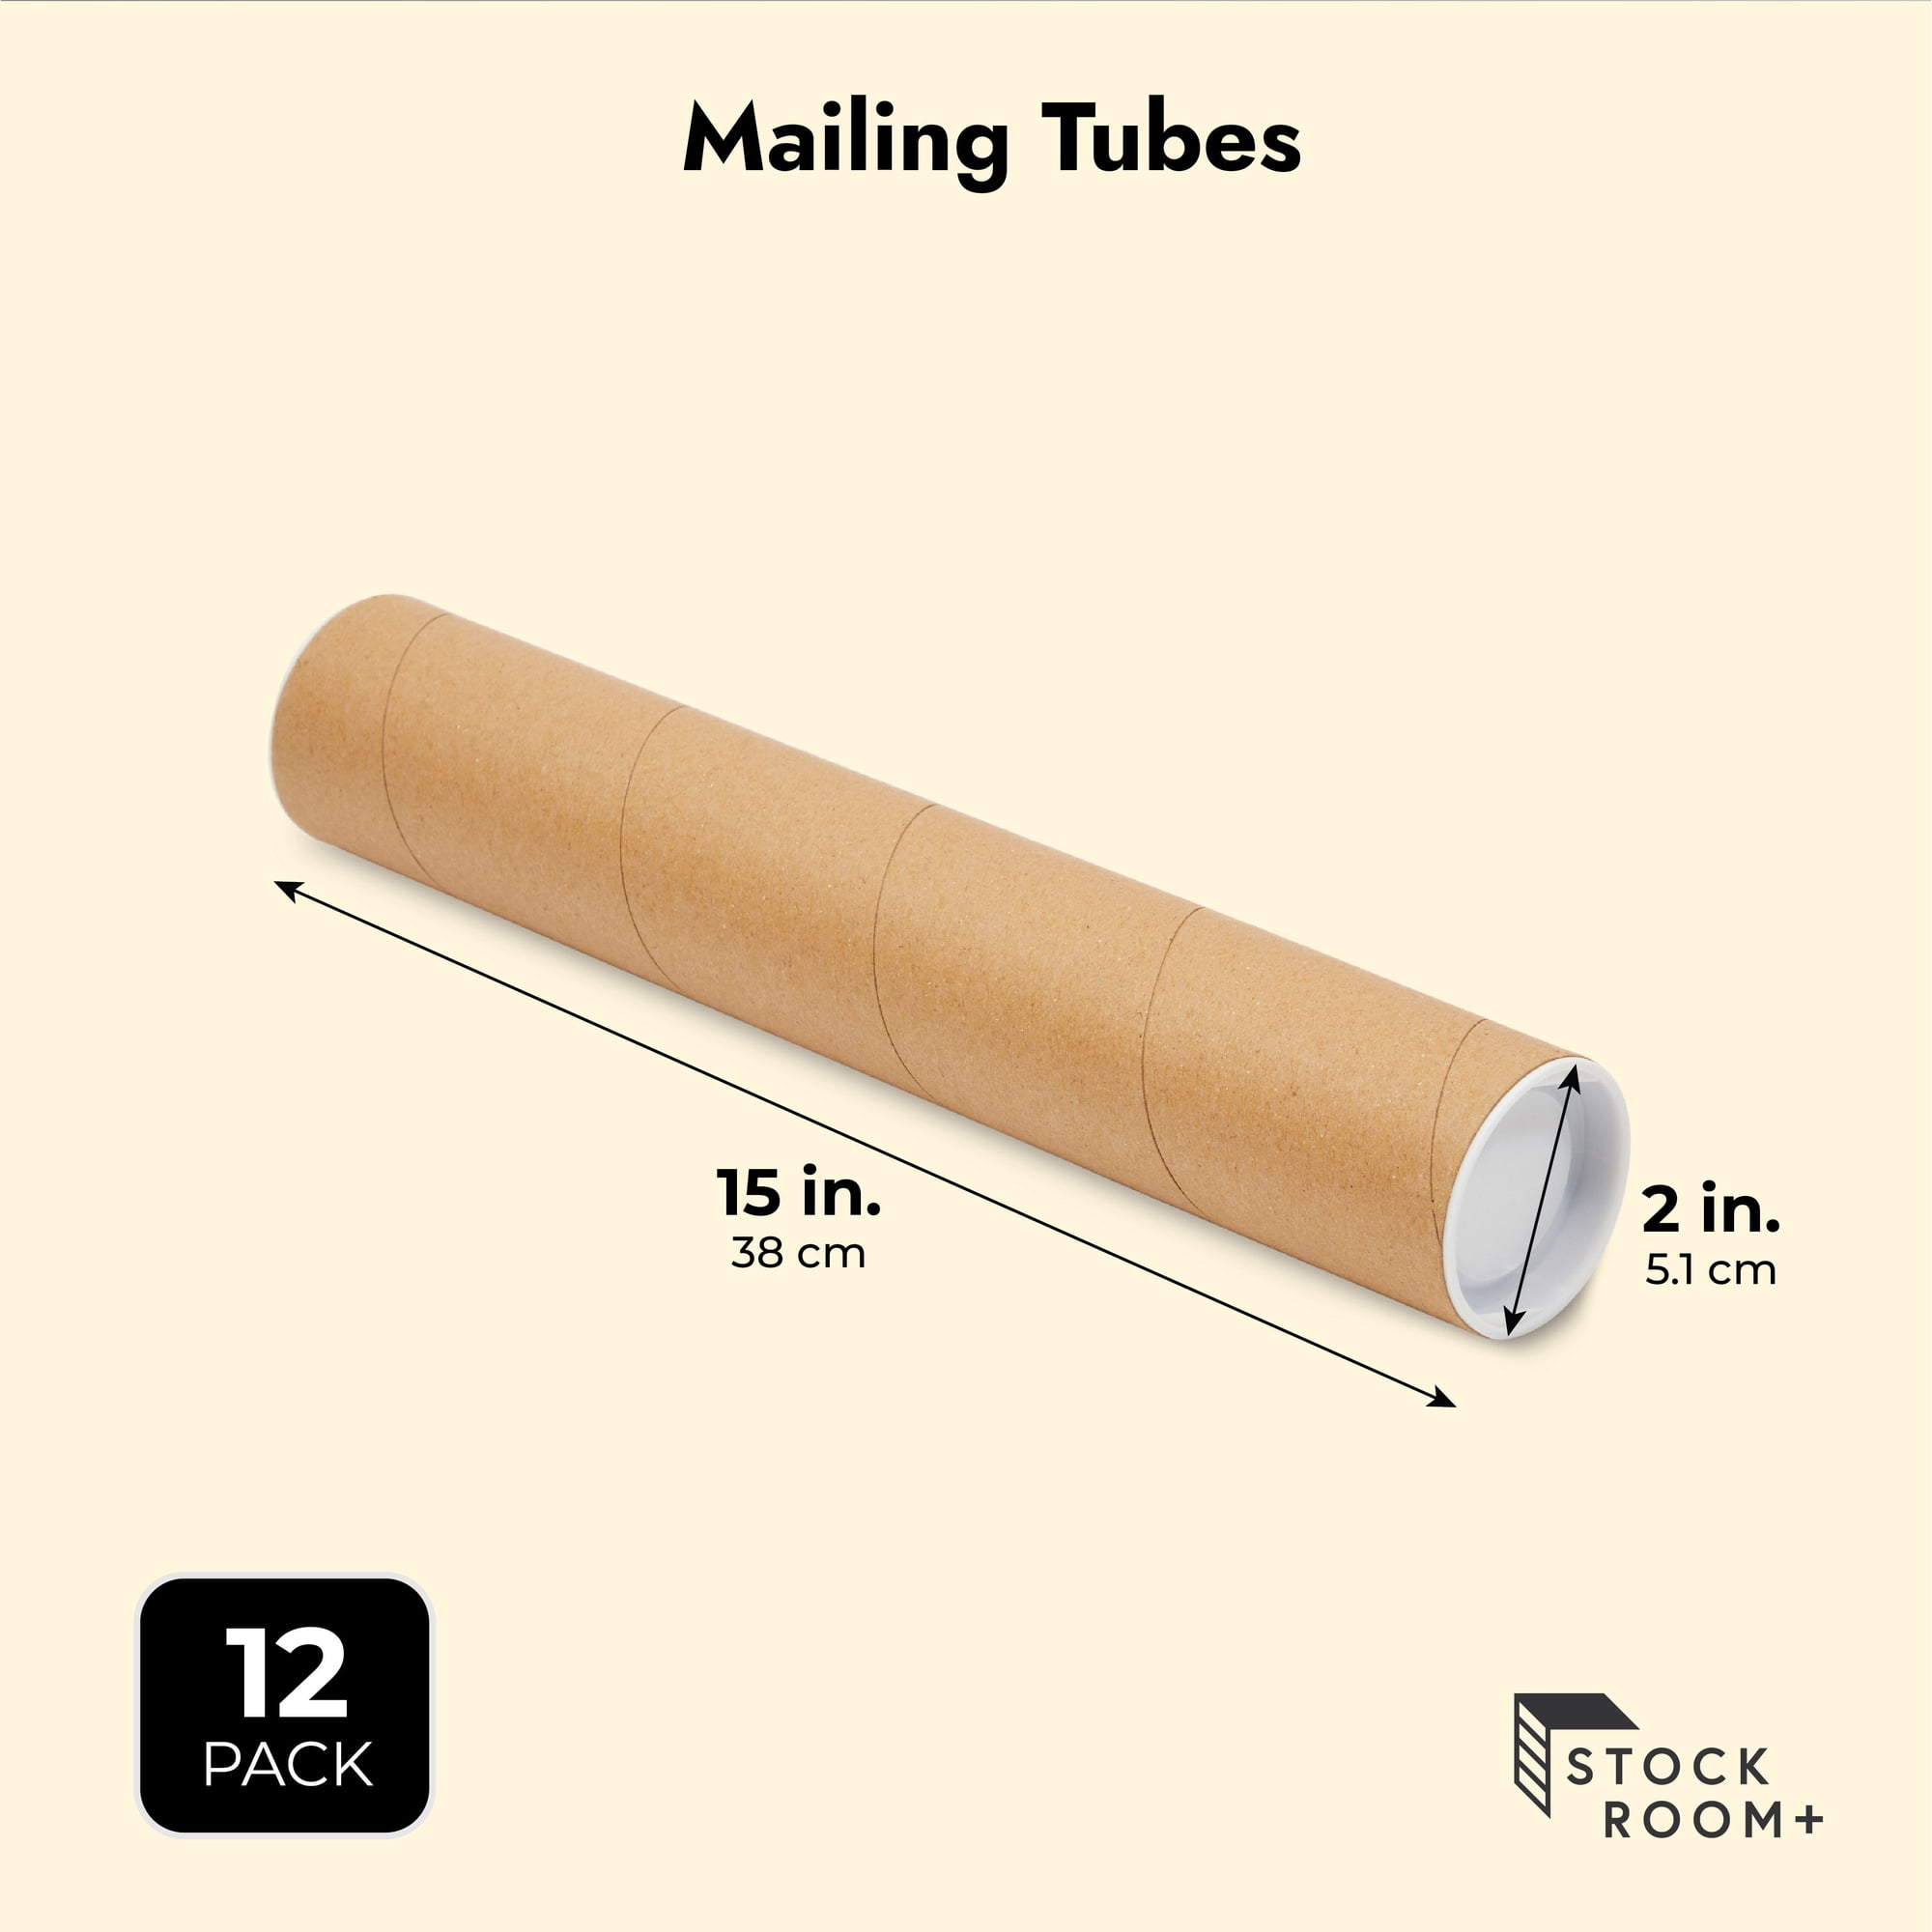 Mailing Tubes - 2x16 Inch Cardboard Mailers - Shipping Posters, Prints,  Maps